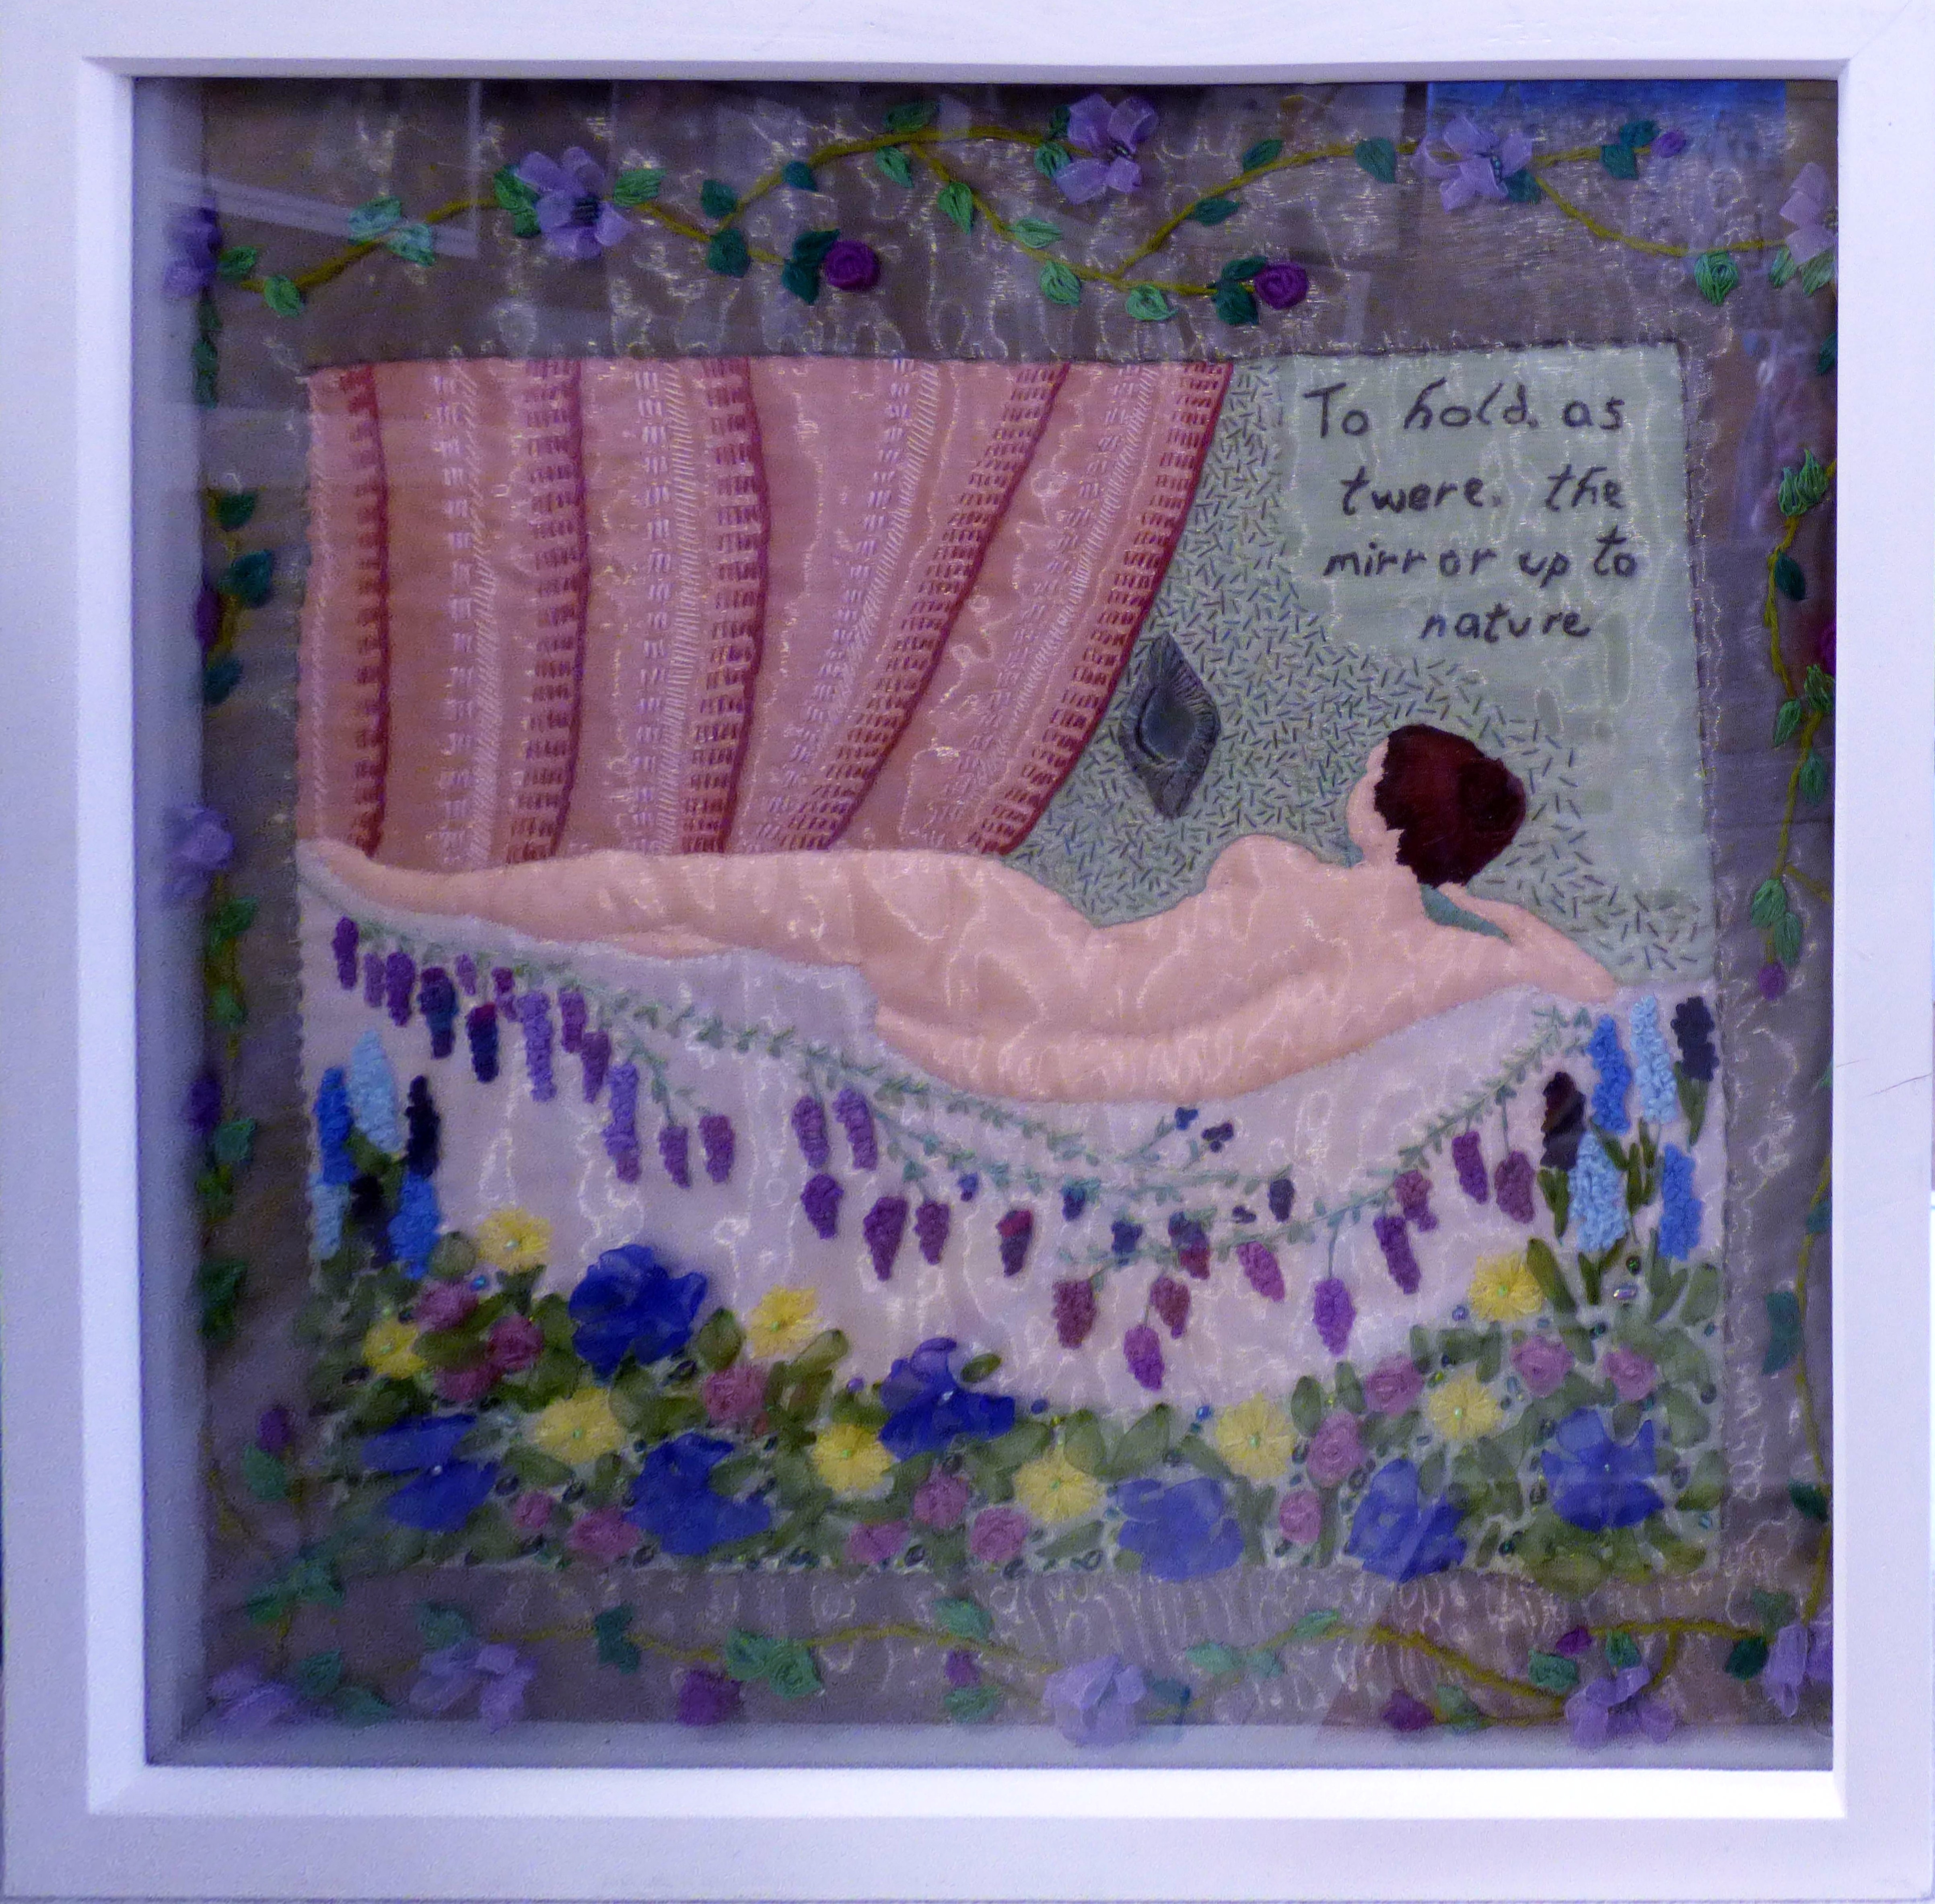 Gill Roberts won 1st Prize in the "From Postcard to Stitch" competition, January 2022